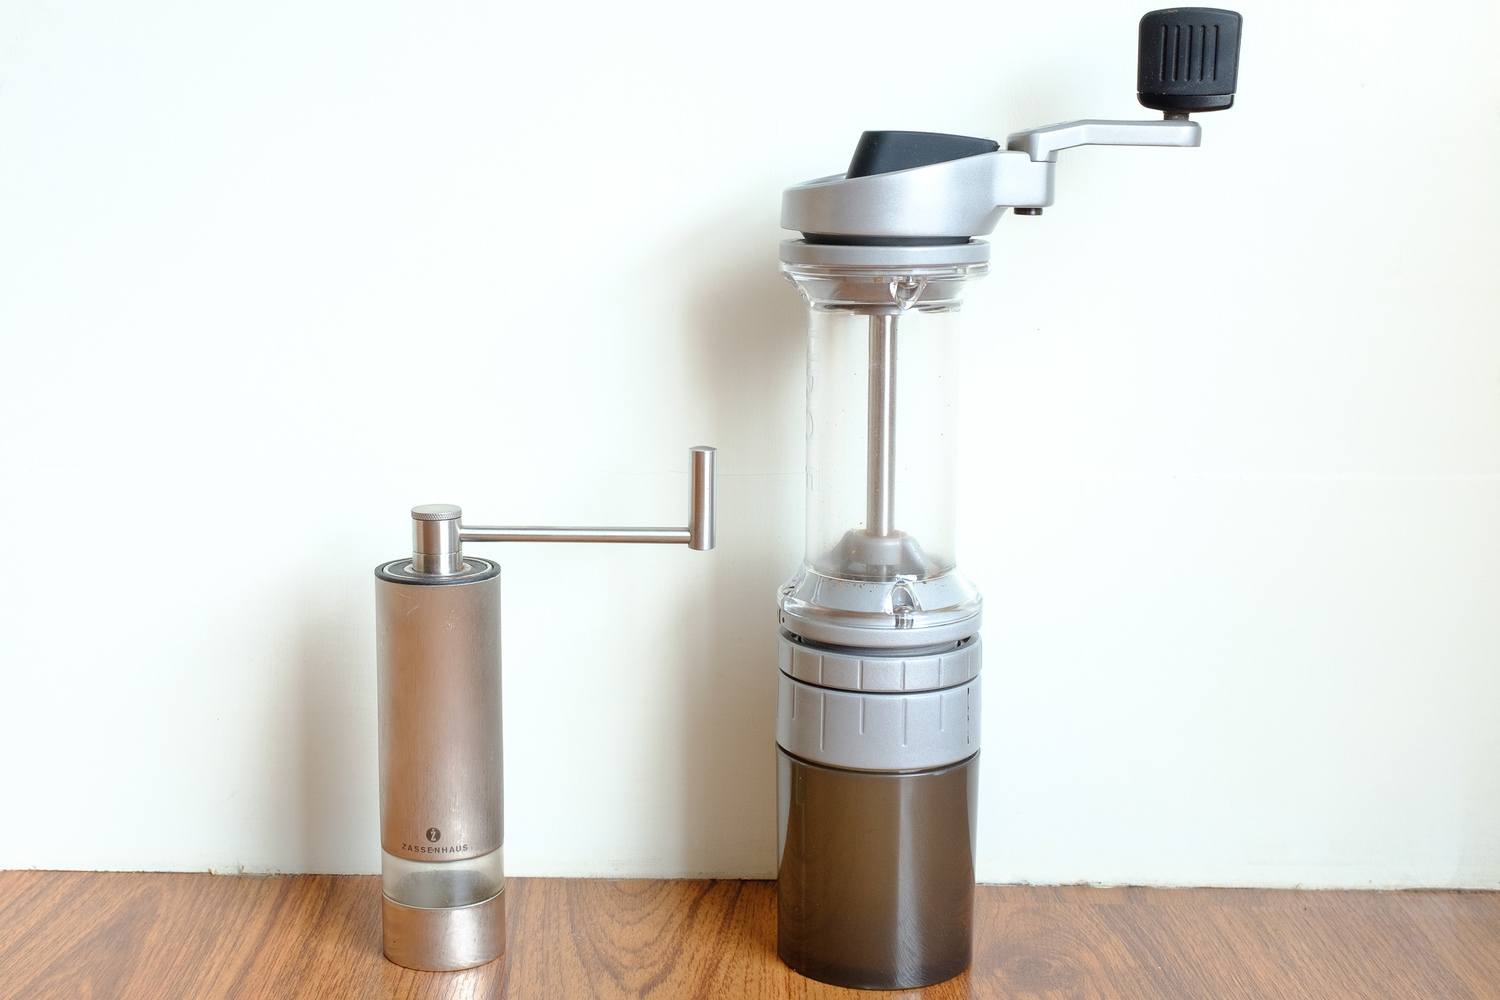 Which Coffee Grinder Is Right For You?, If you're new to coffee, finding  the right grinder can be the biggest challenge! Let me break down what each  one is good for.